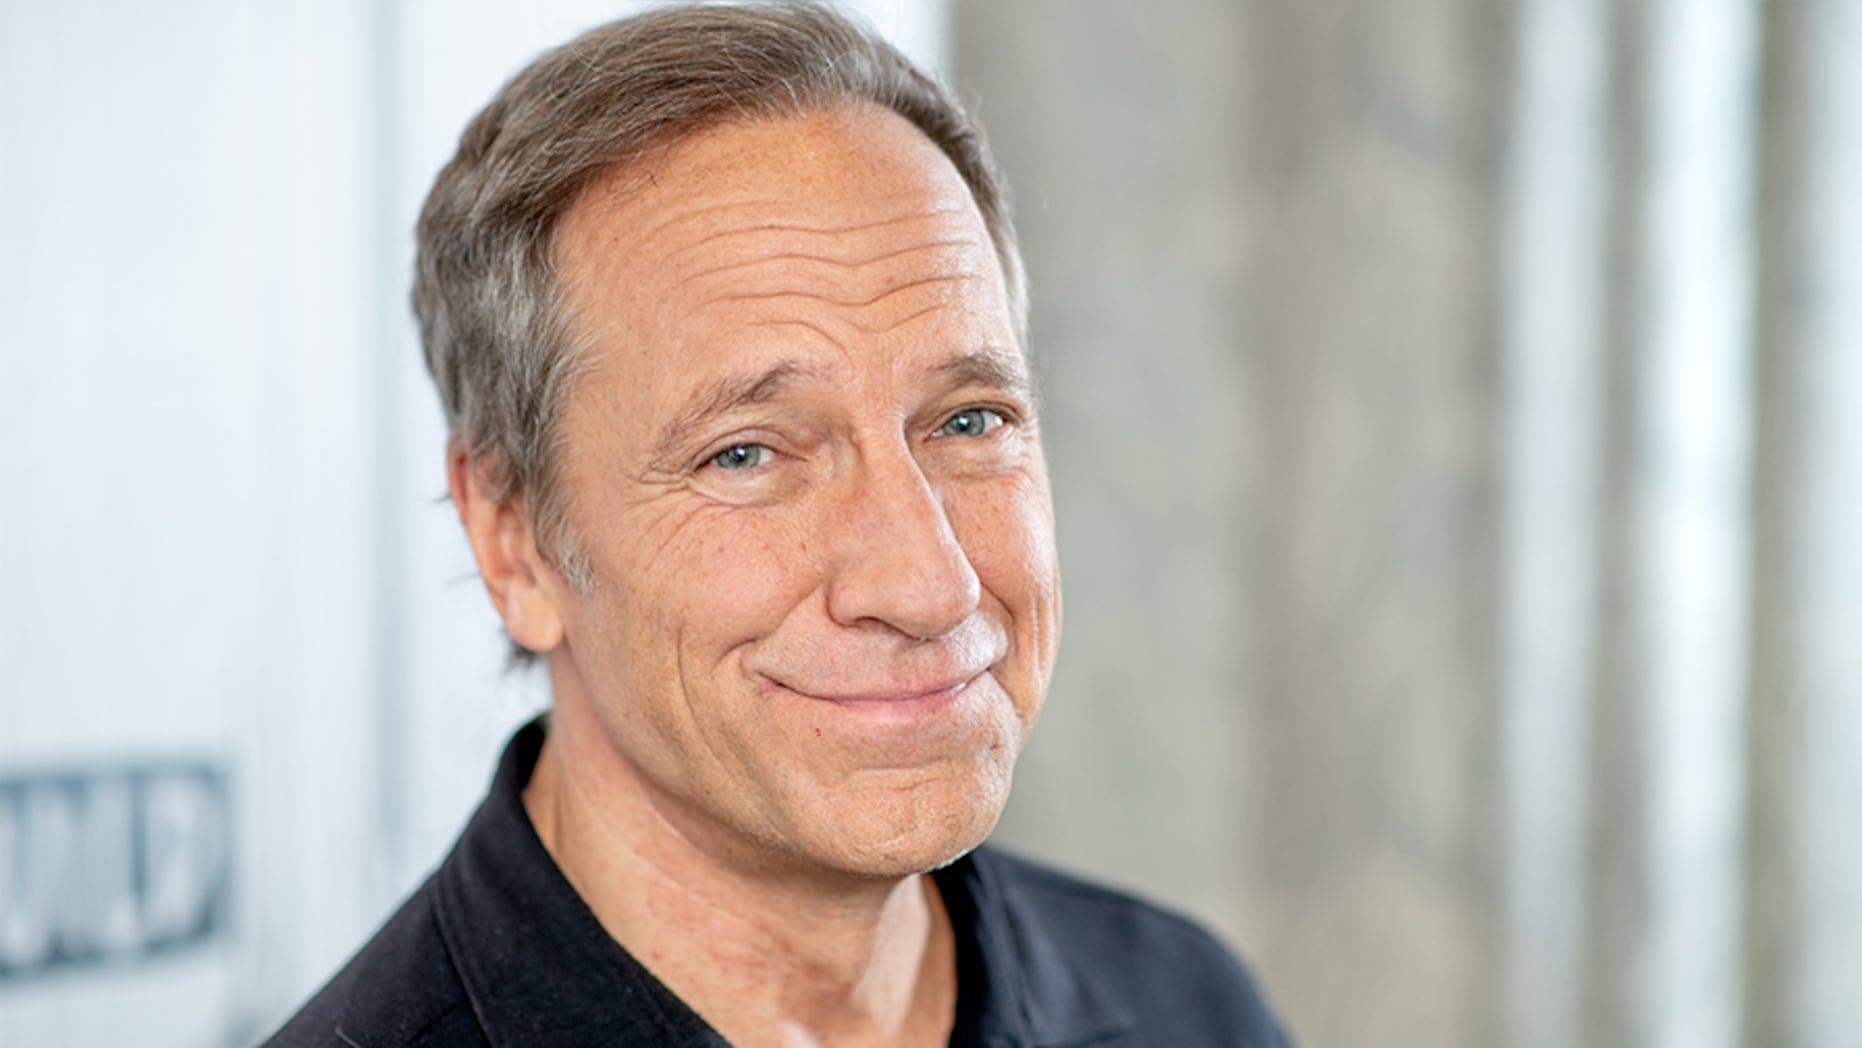 Mike Rowe reveals why 'Dirty Jobs' is airing another season during Fox ...